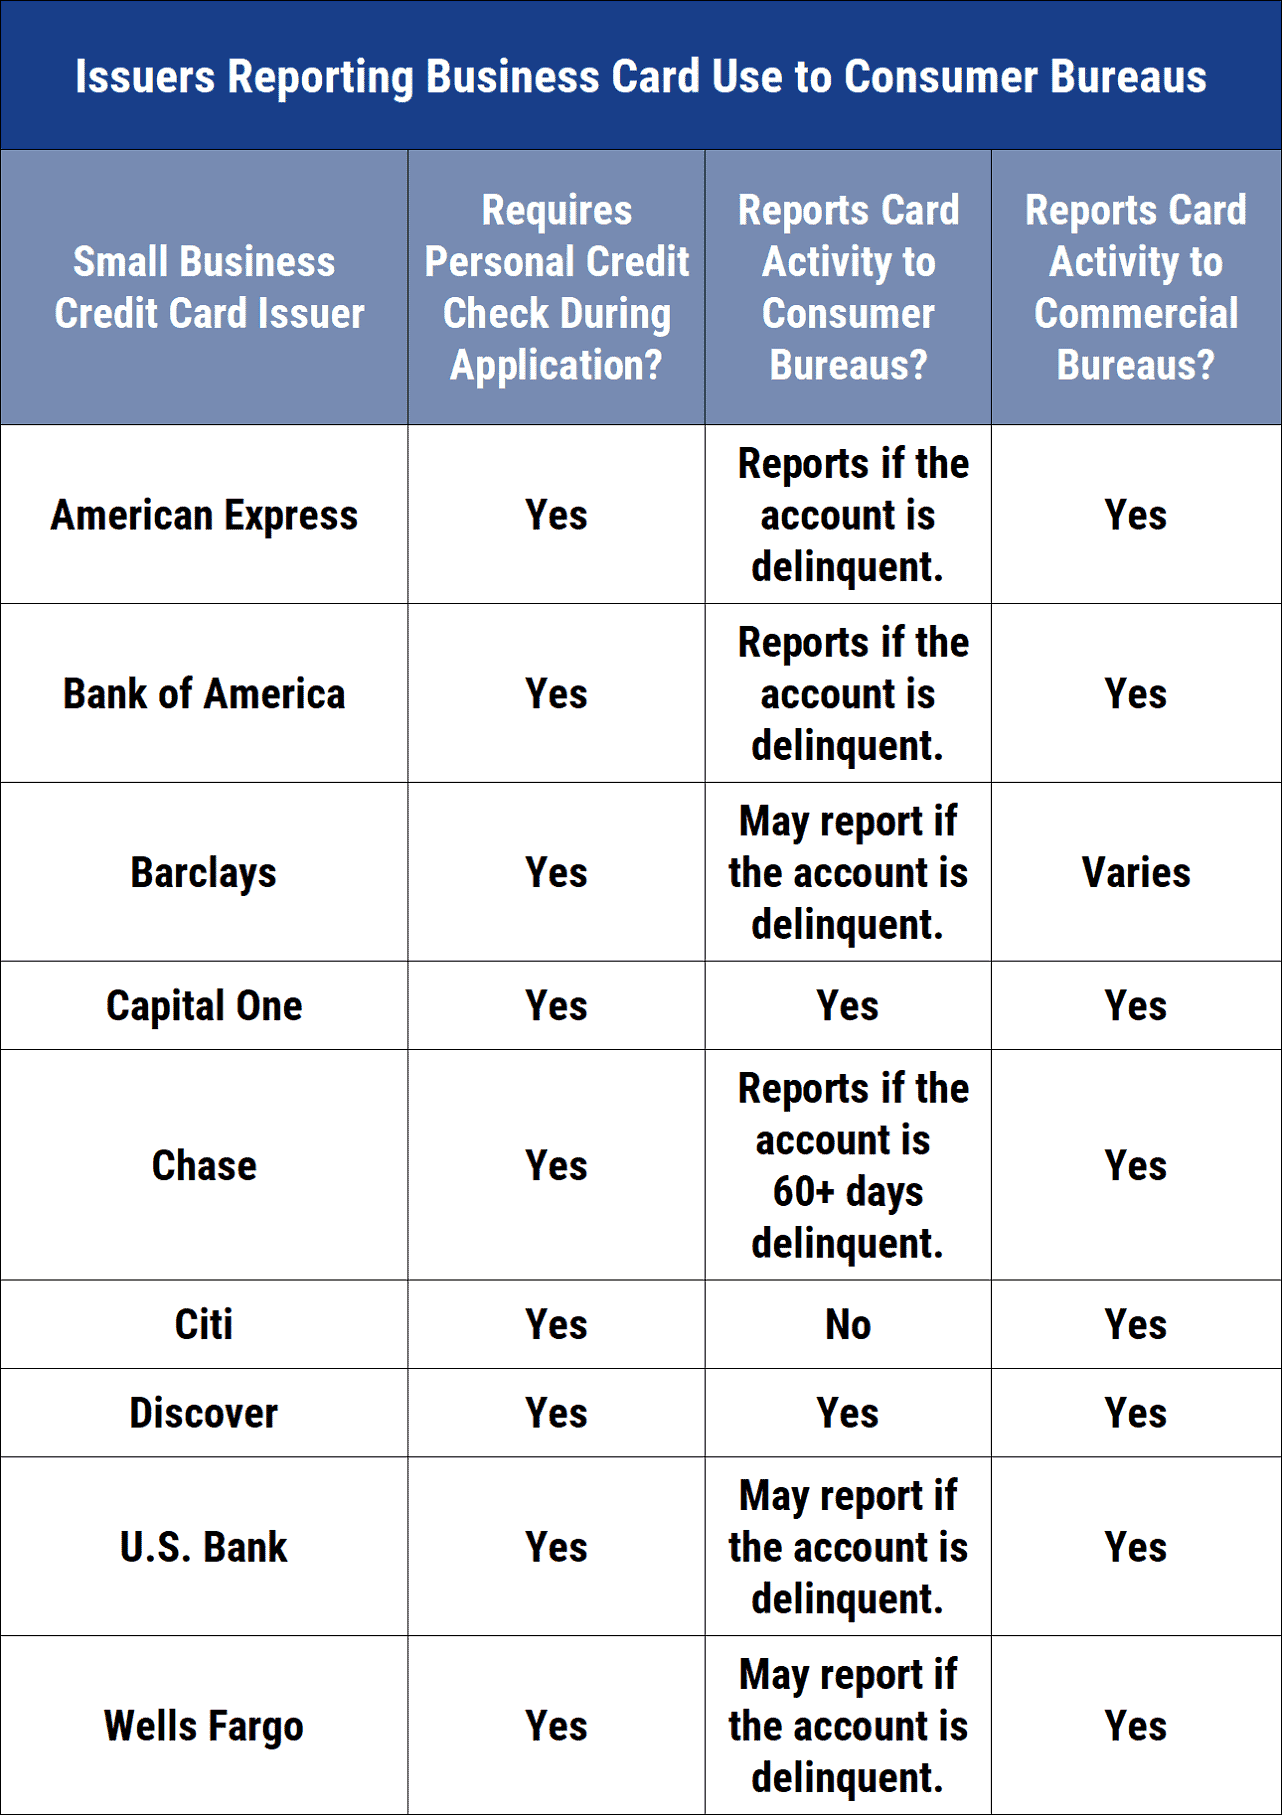 Issuers that report business card use to consumer bureaus